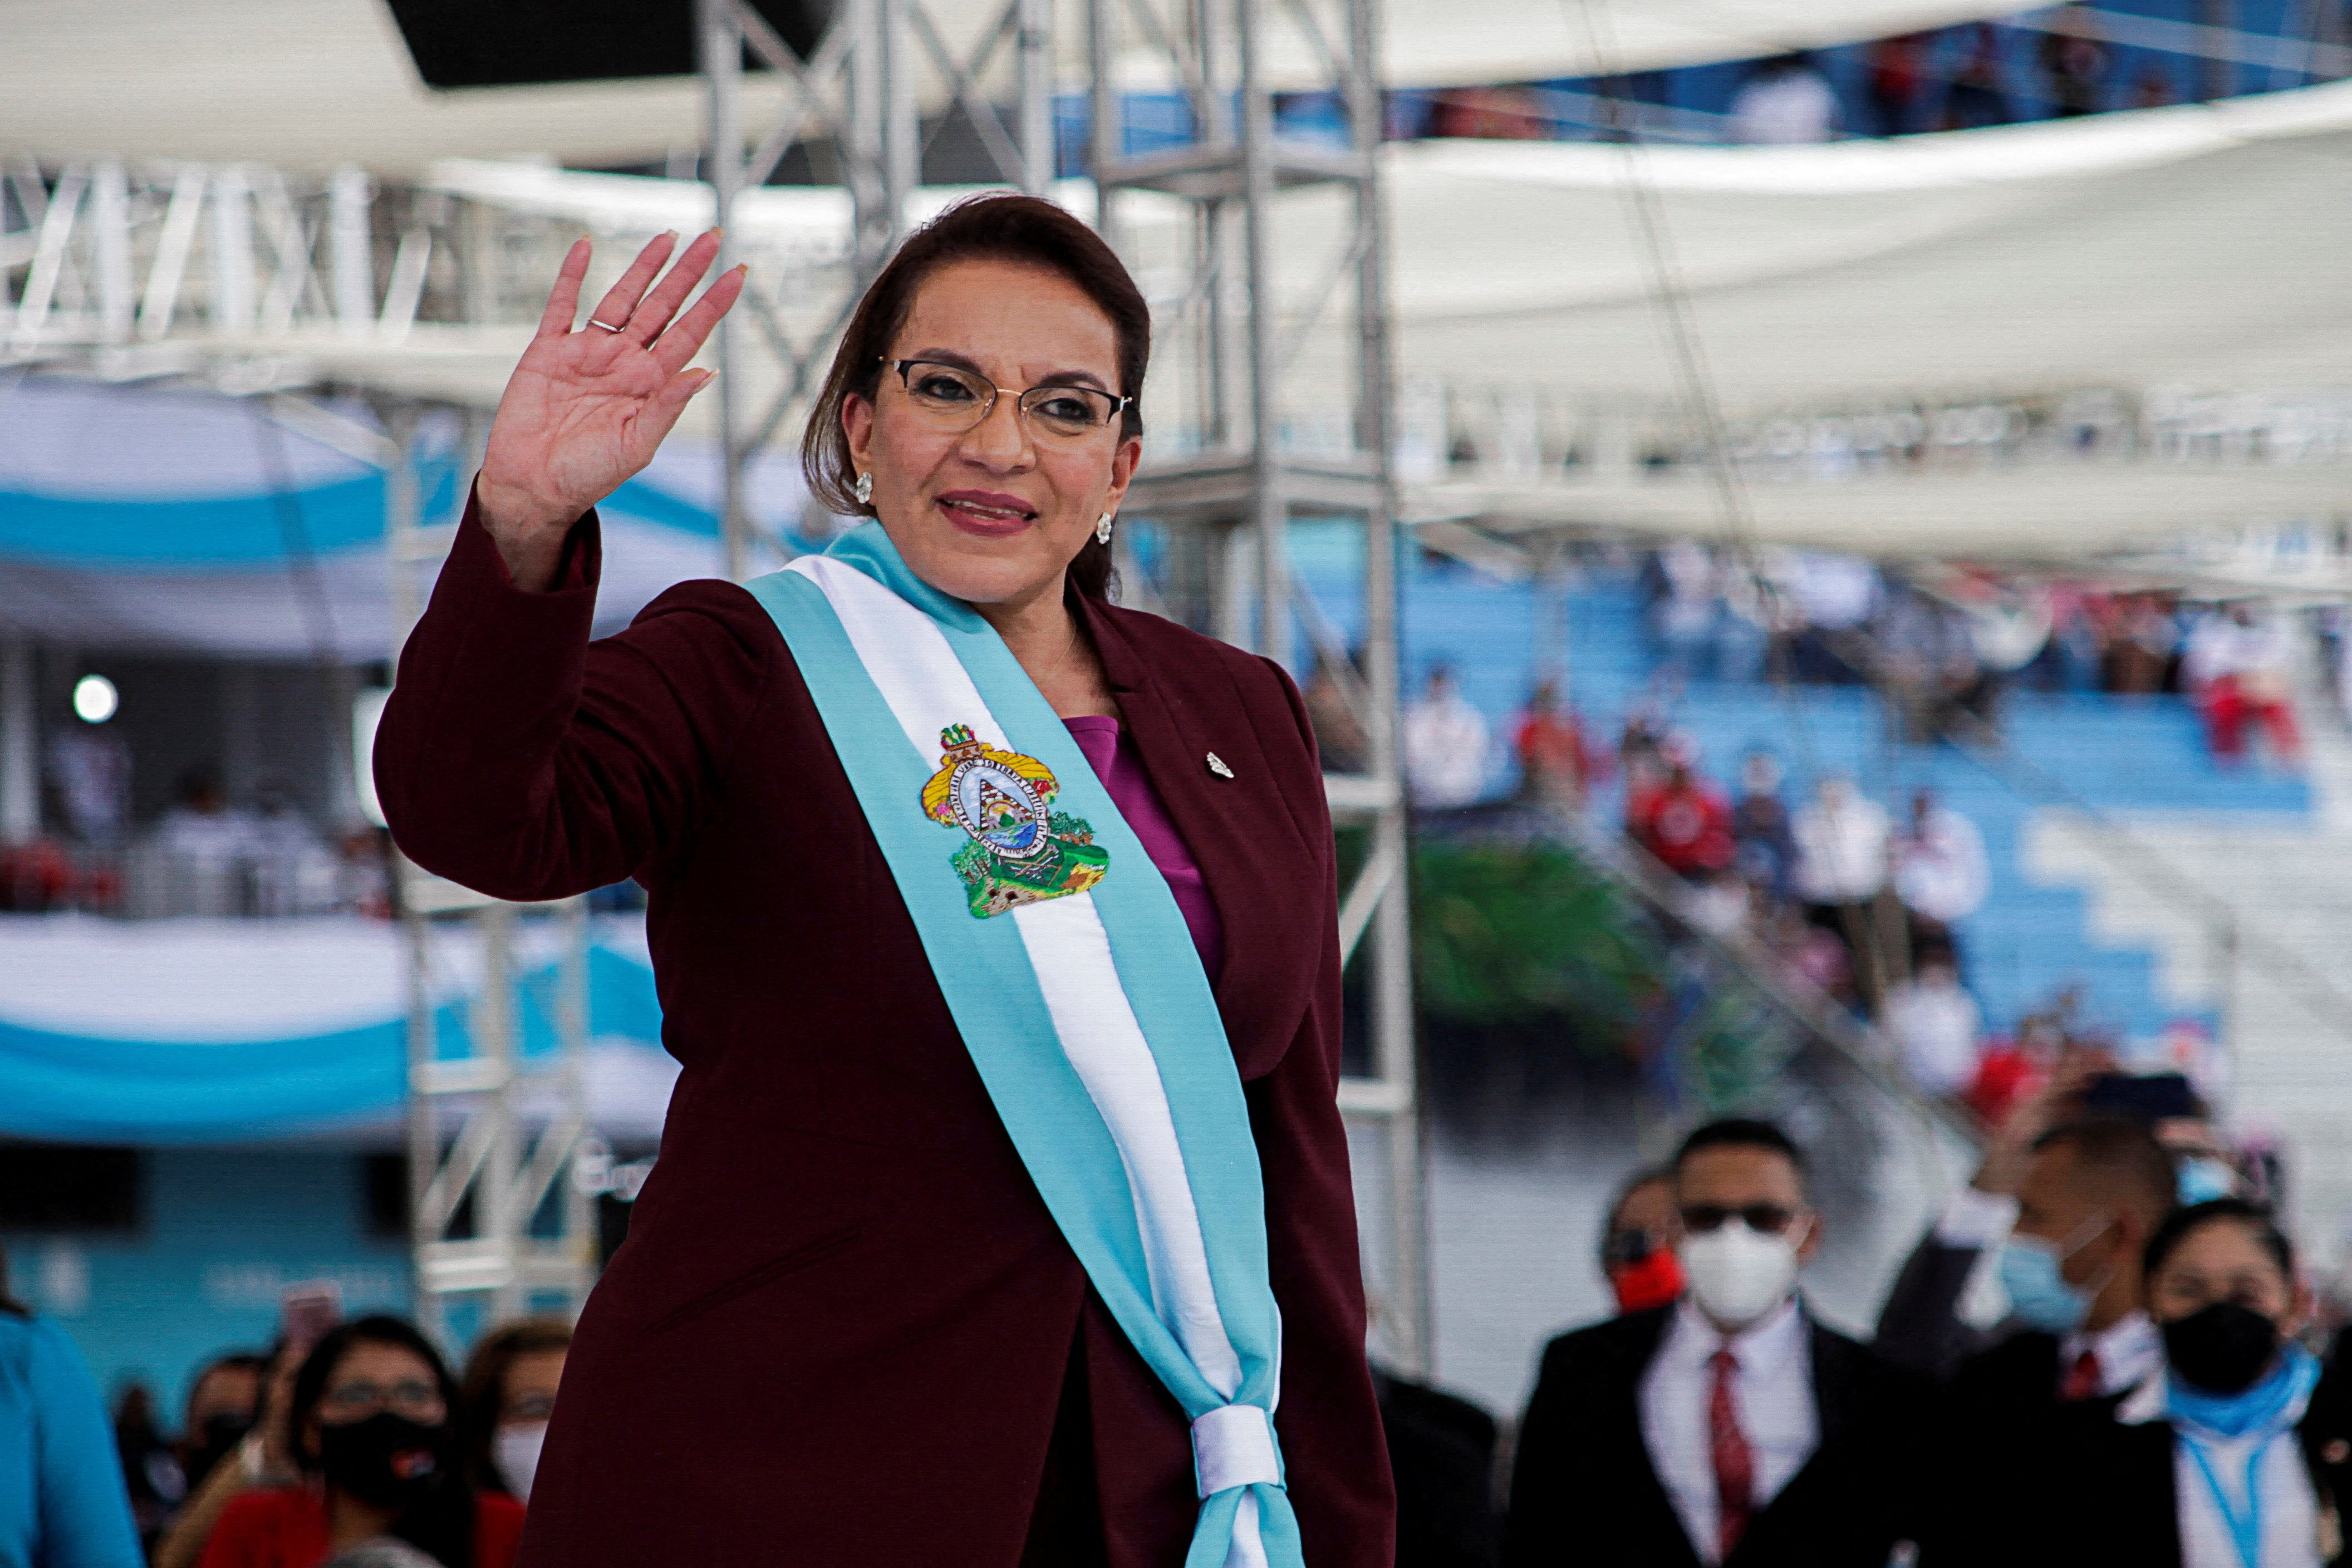 New Honduran President Xiomara Castro waves to invitees after being sworn-in, during a ceremony in Tegucigalpa